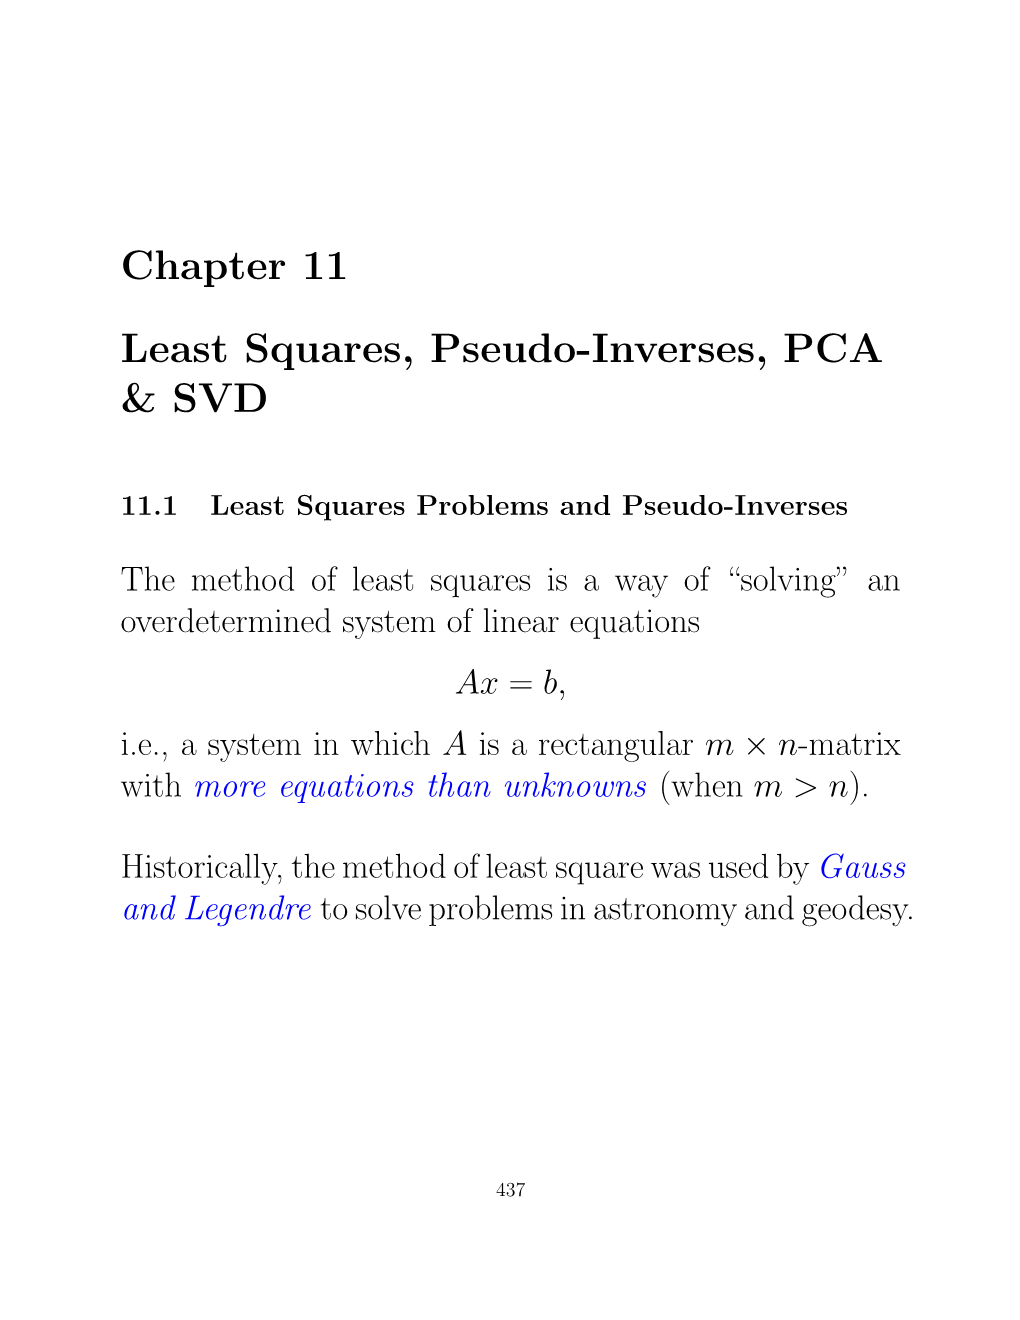 Chapter 11 Least Squares, Pseudo-Inverses, PCA &